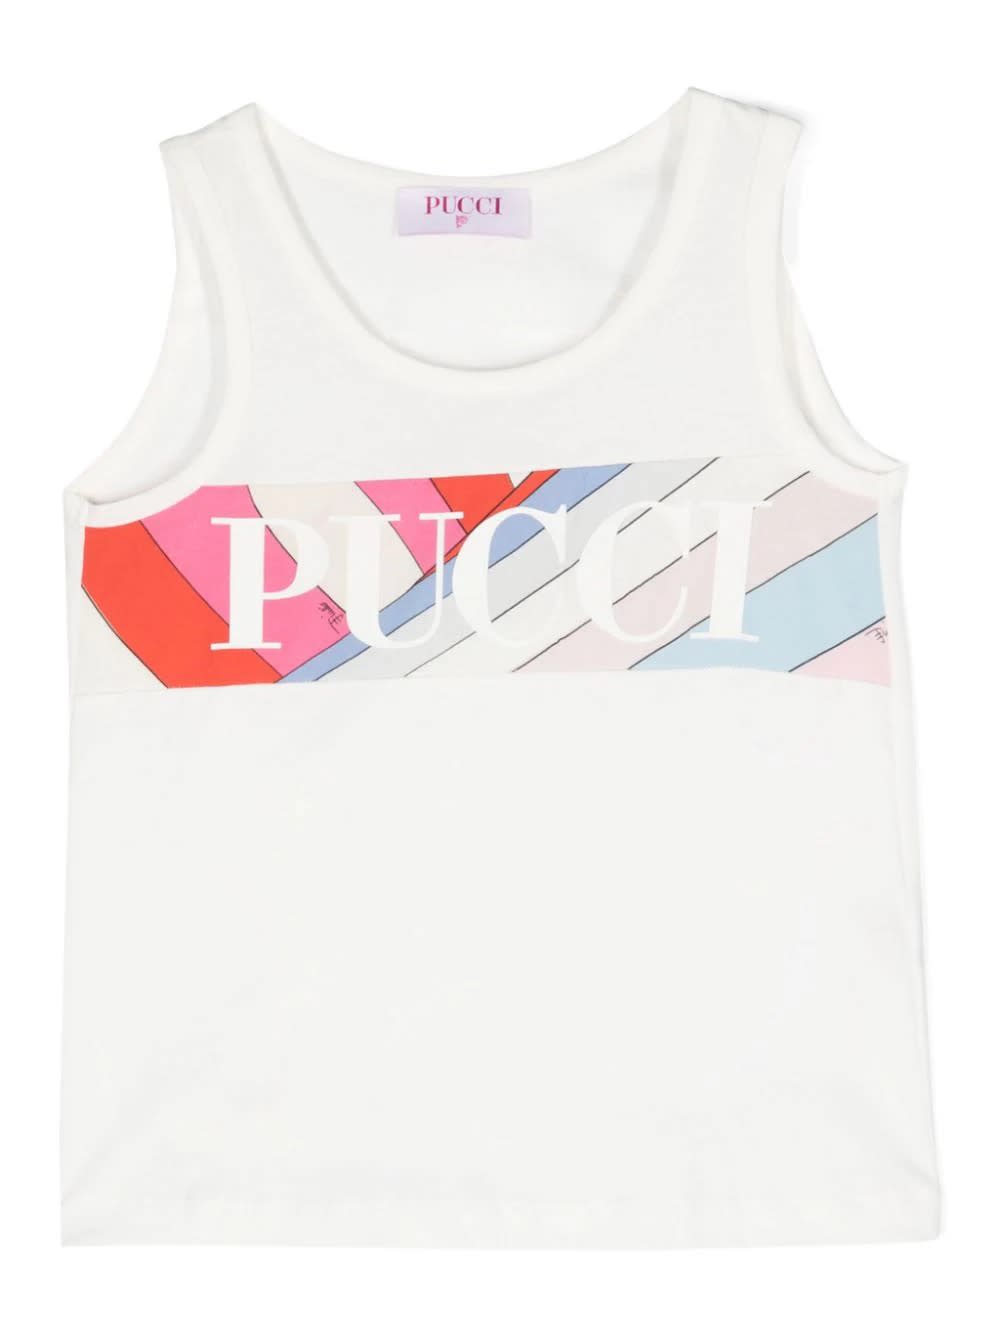 Pucci Kids' White Tank Top With  Print On Iride Band